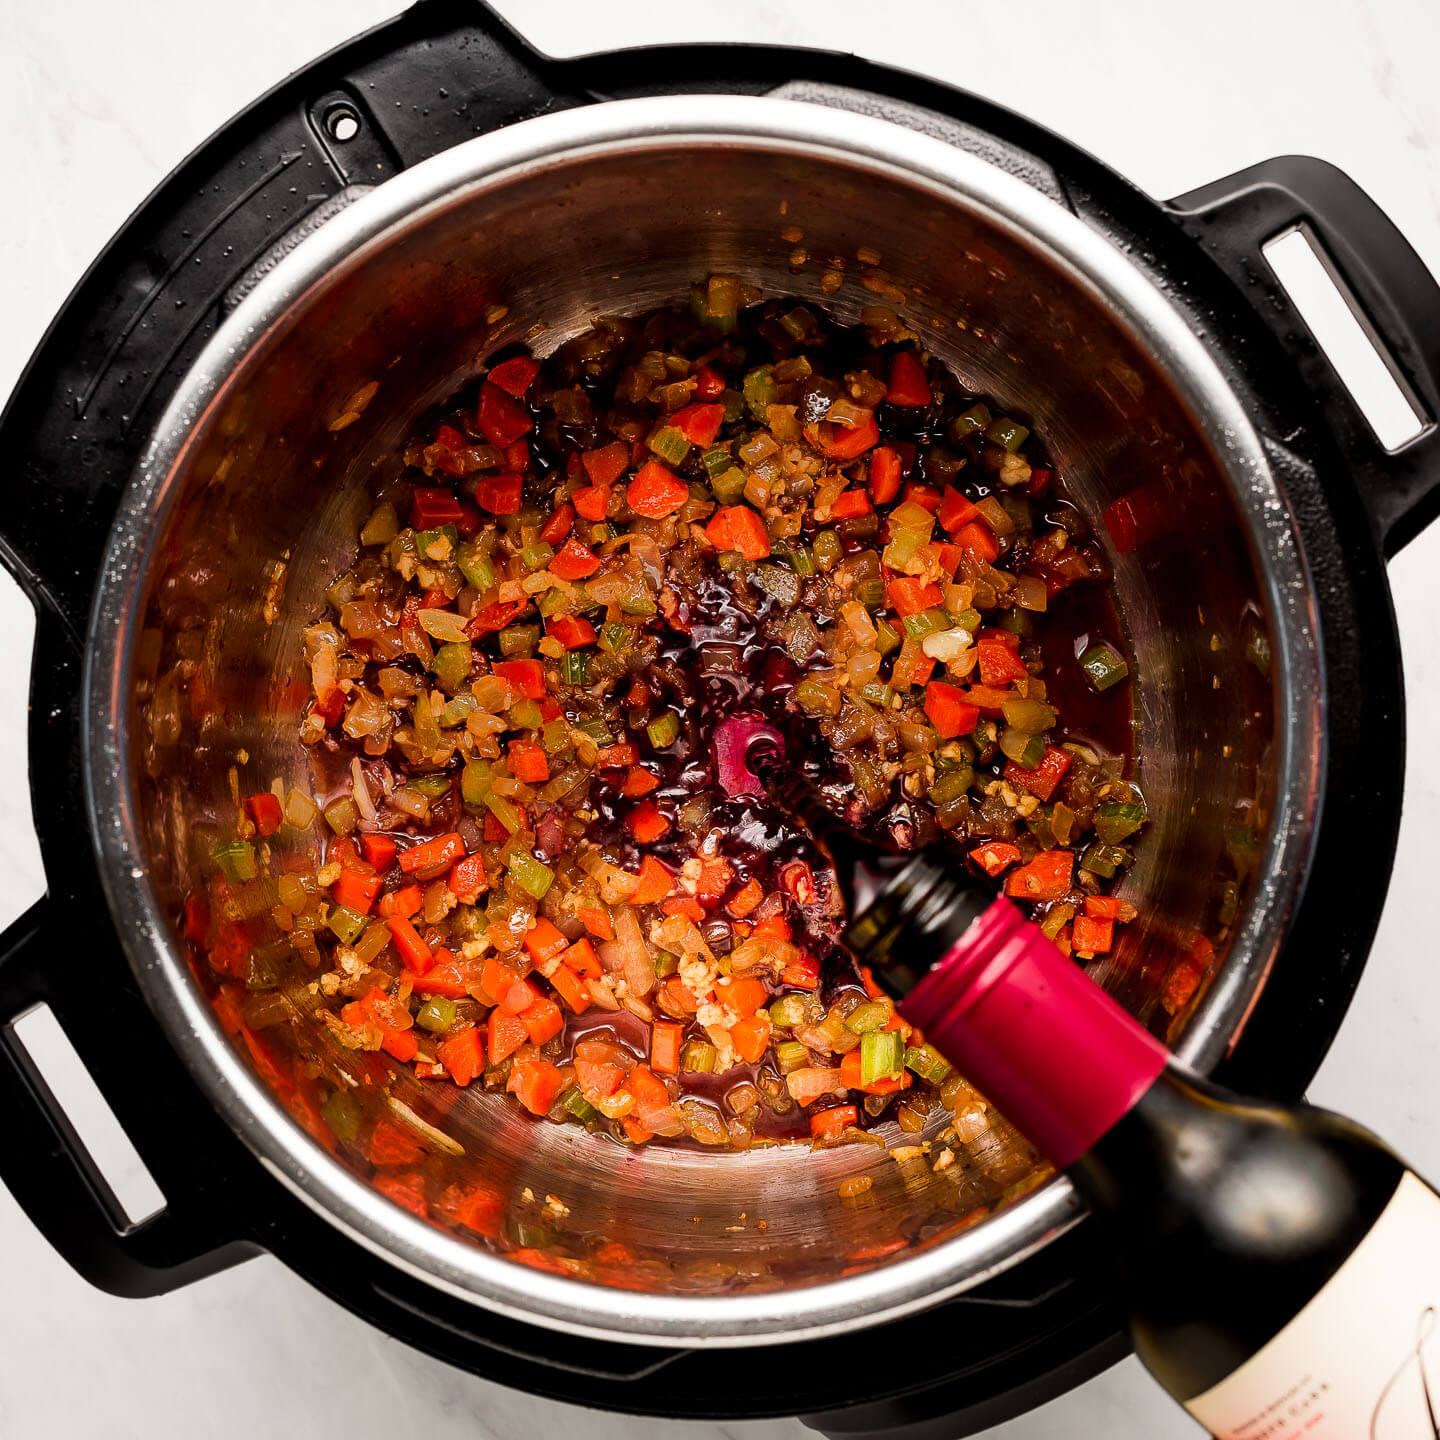 Pouring wine into an Instant Pot of cooked vegetables.